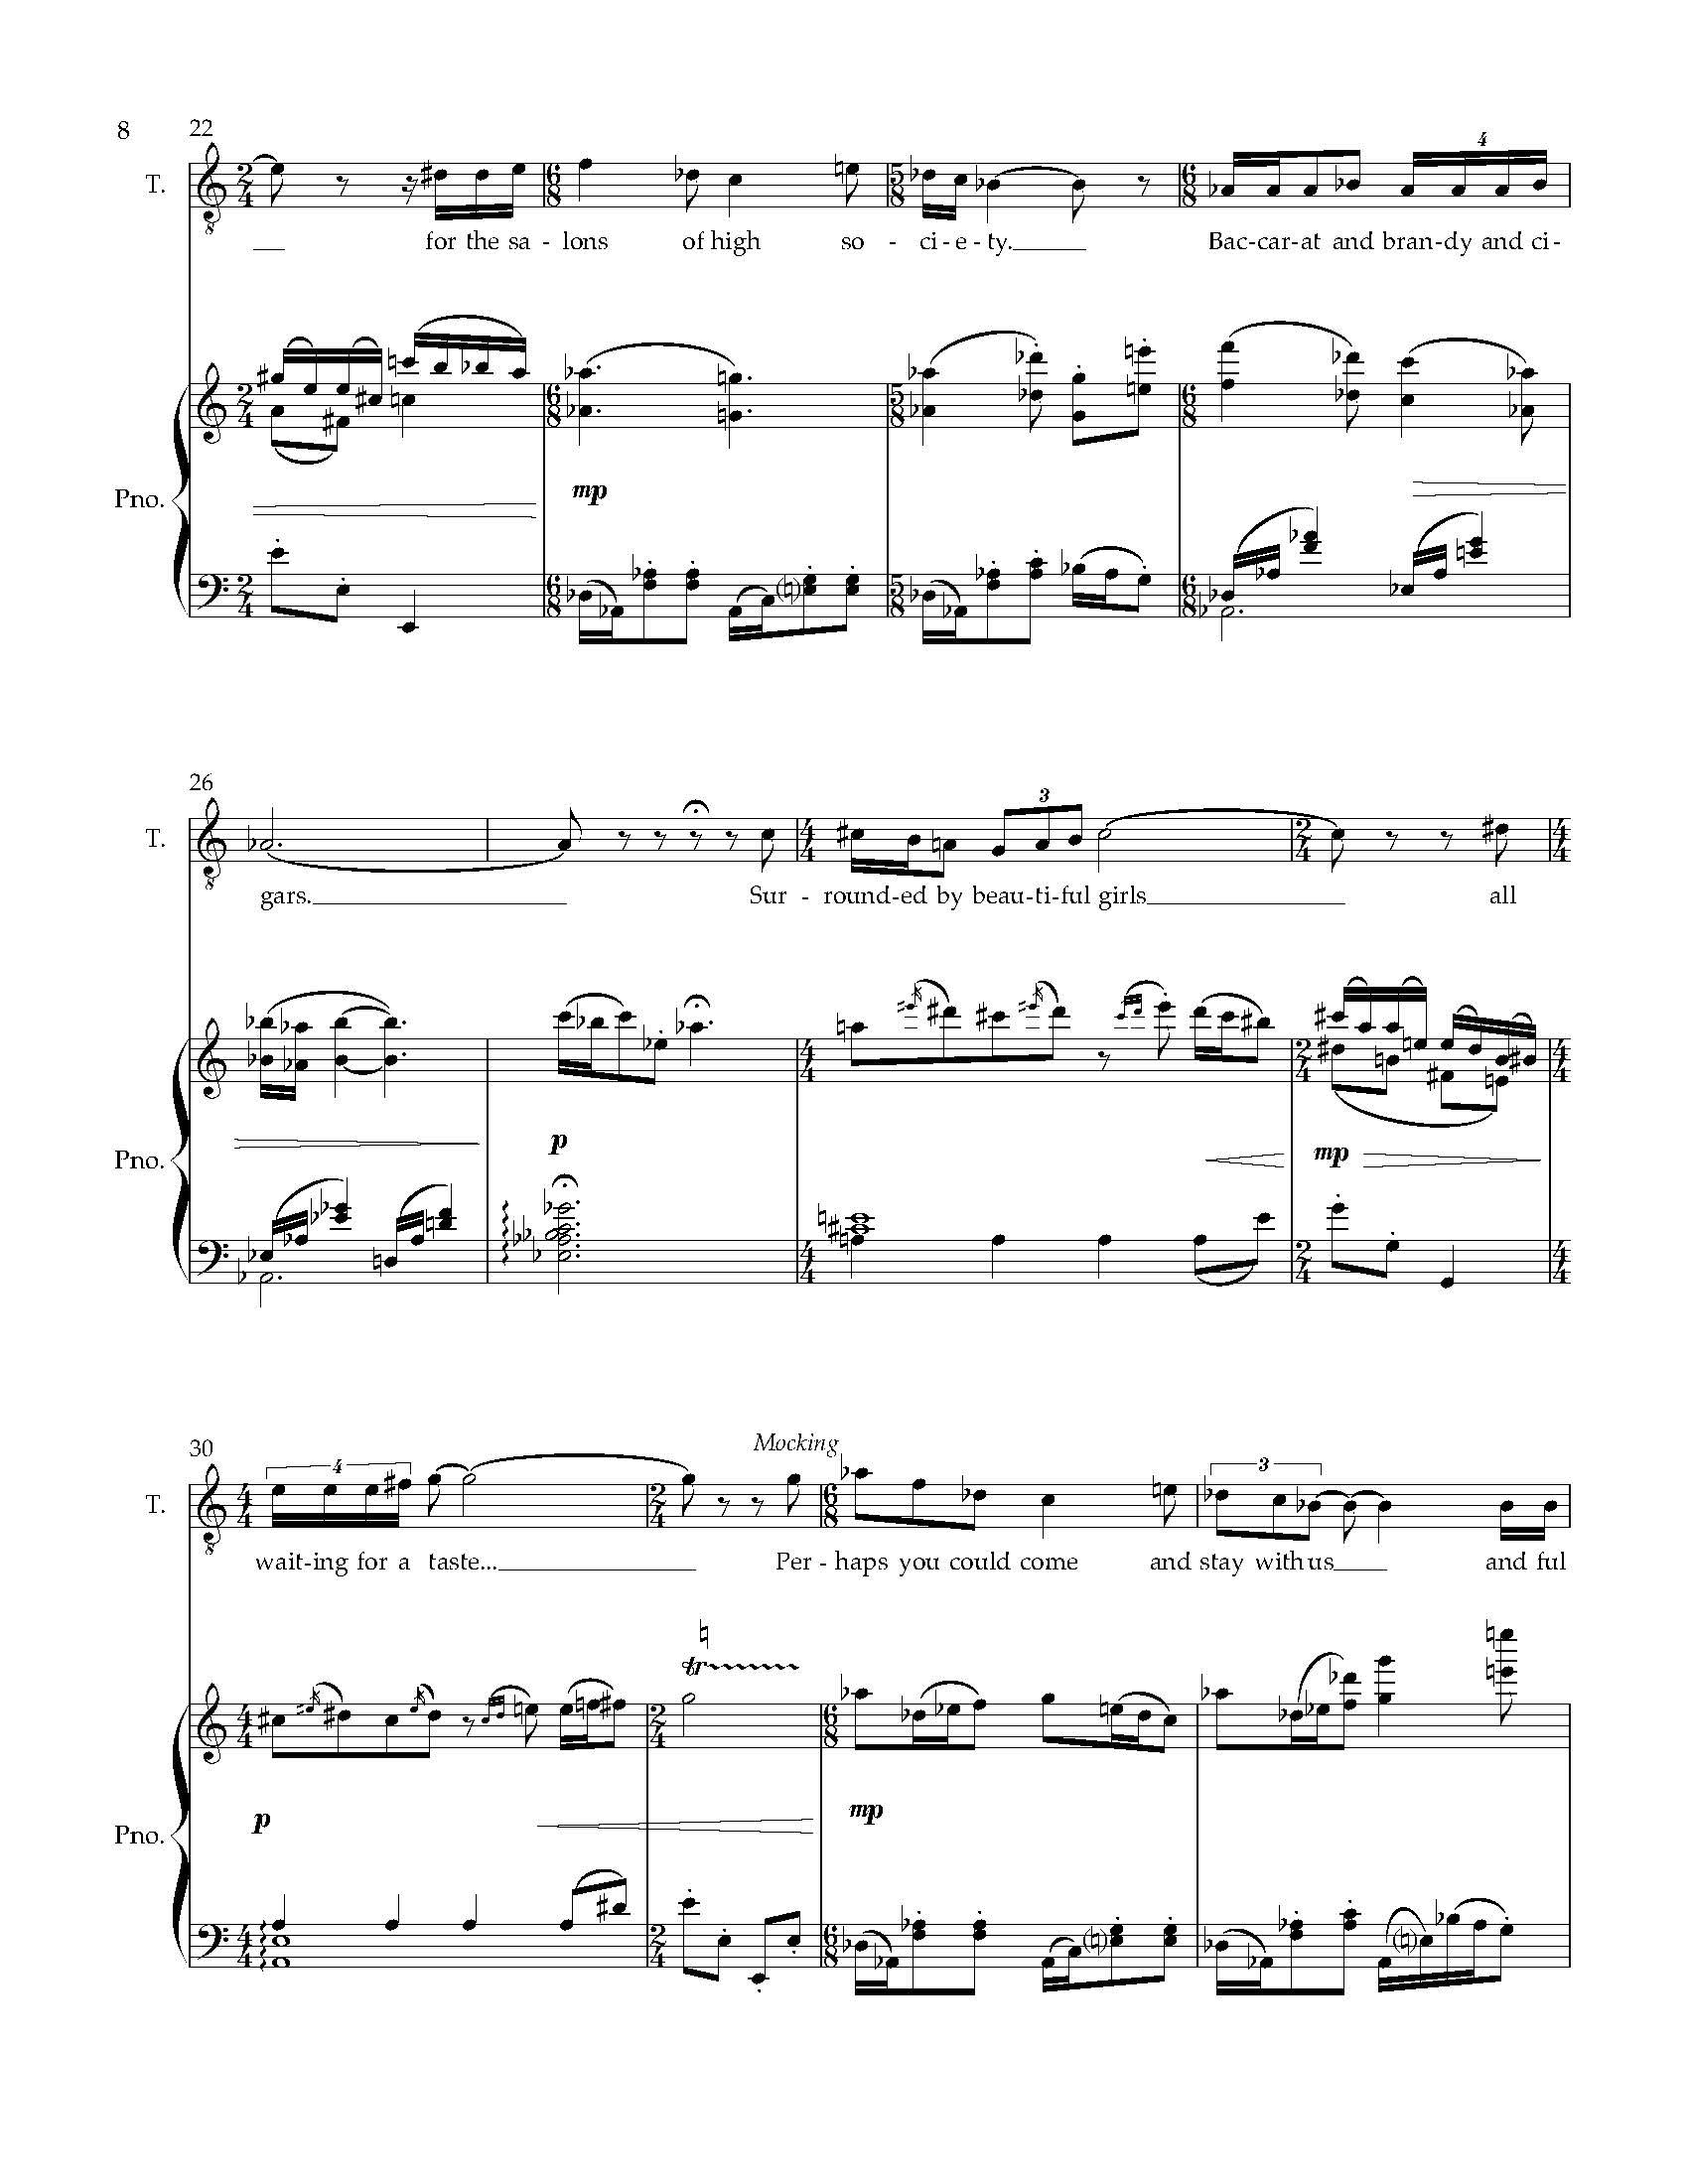 Five Arias from HWGS - Complete Score (1)_Page_12.jpg